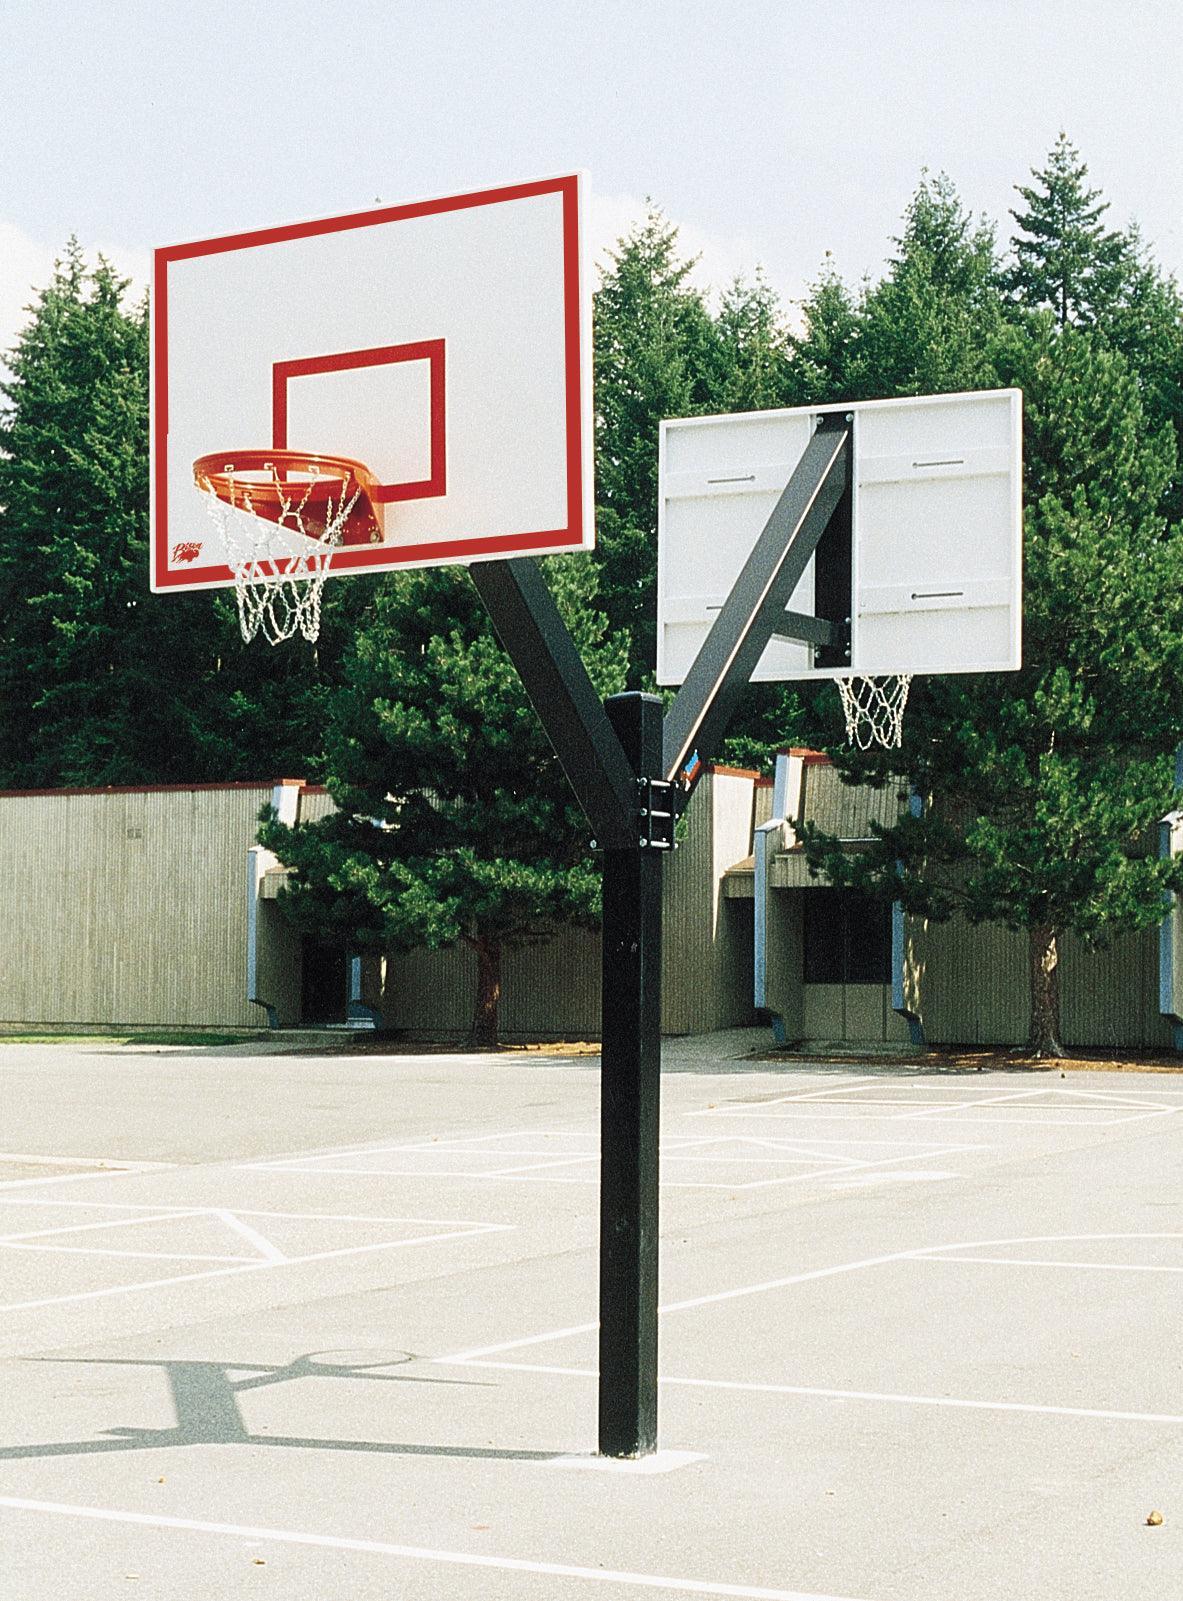 Ultimate Double-Sided Basketball System - bisoninc